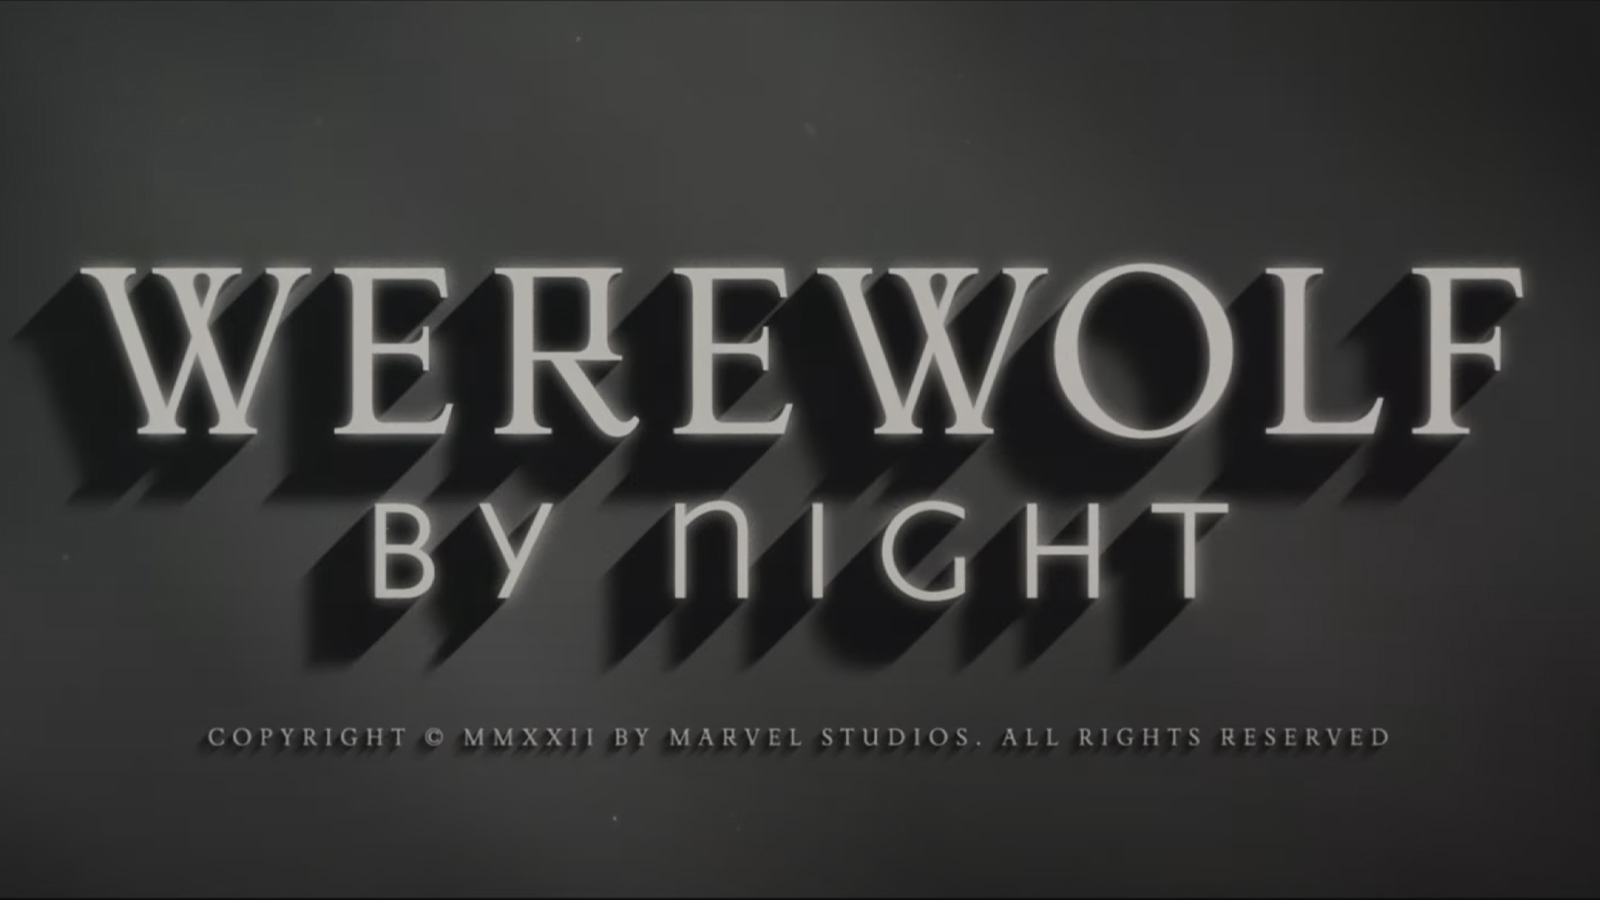 Marvel Studios Debuts Werewolf by Night in Color Trailer and Poster